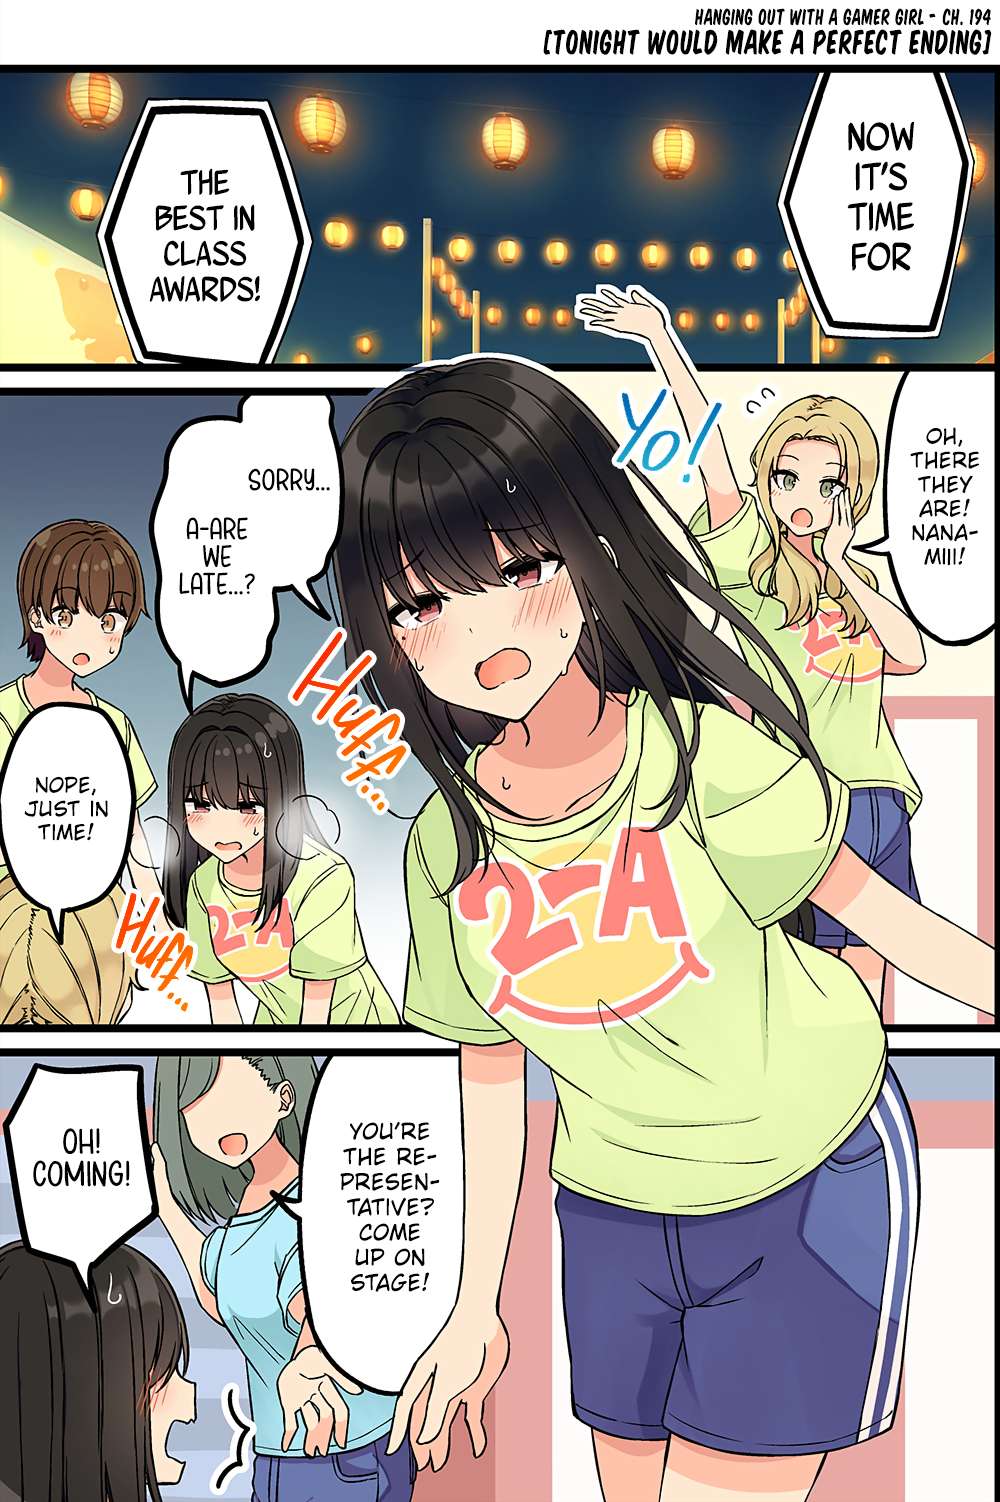 Hanging Out With a Gamer Girl - chapter 194 - #1